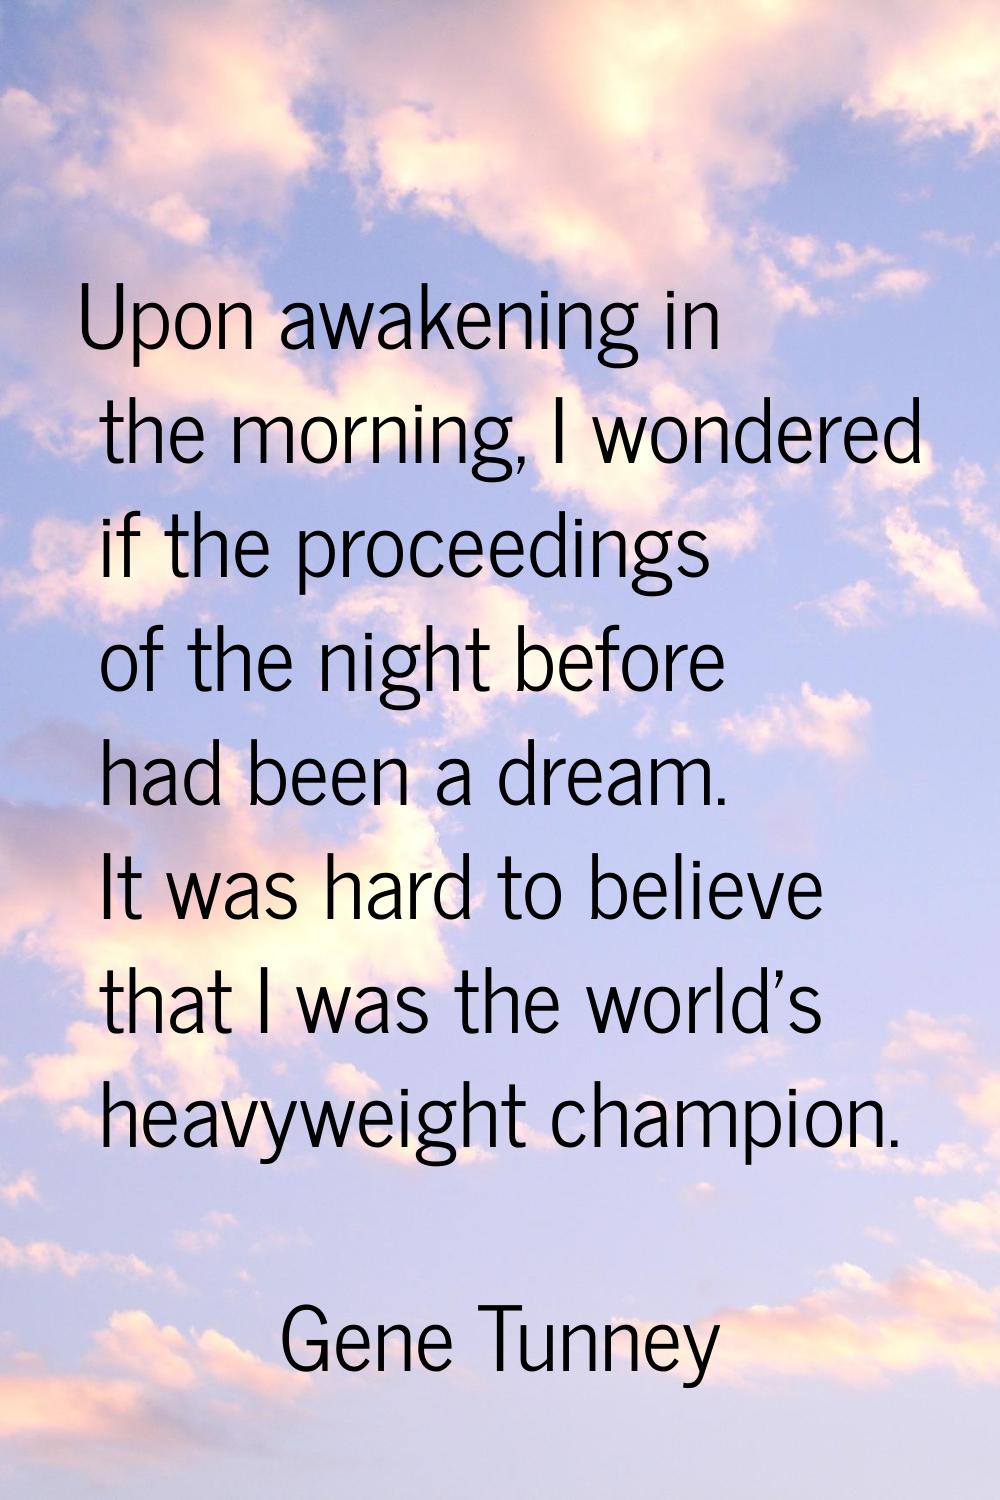 Upon awakening in the morning, I wondered if the proceedings of the night before had been a dream. 